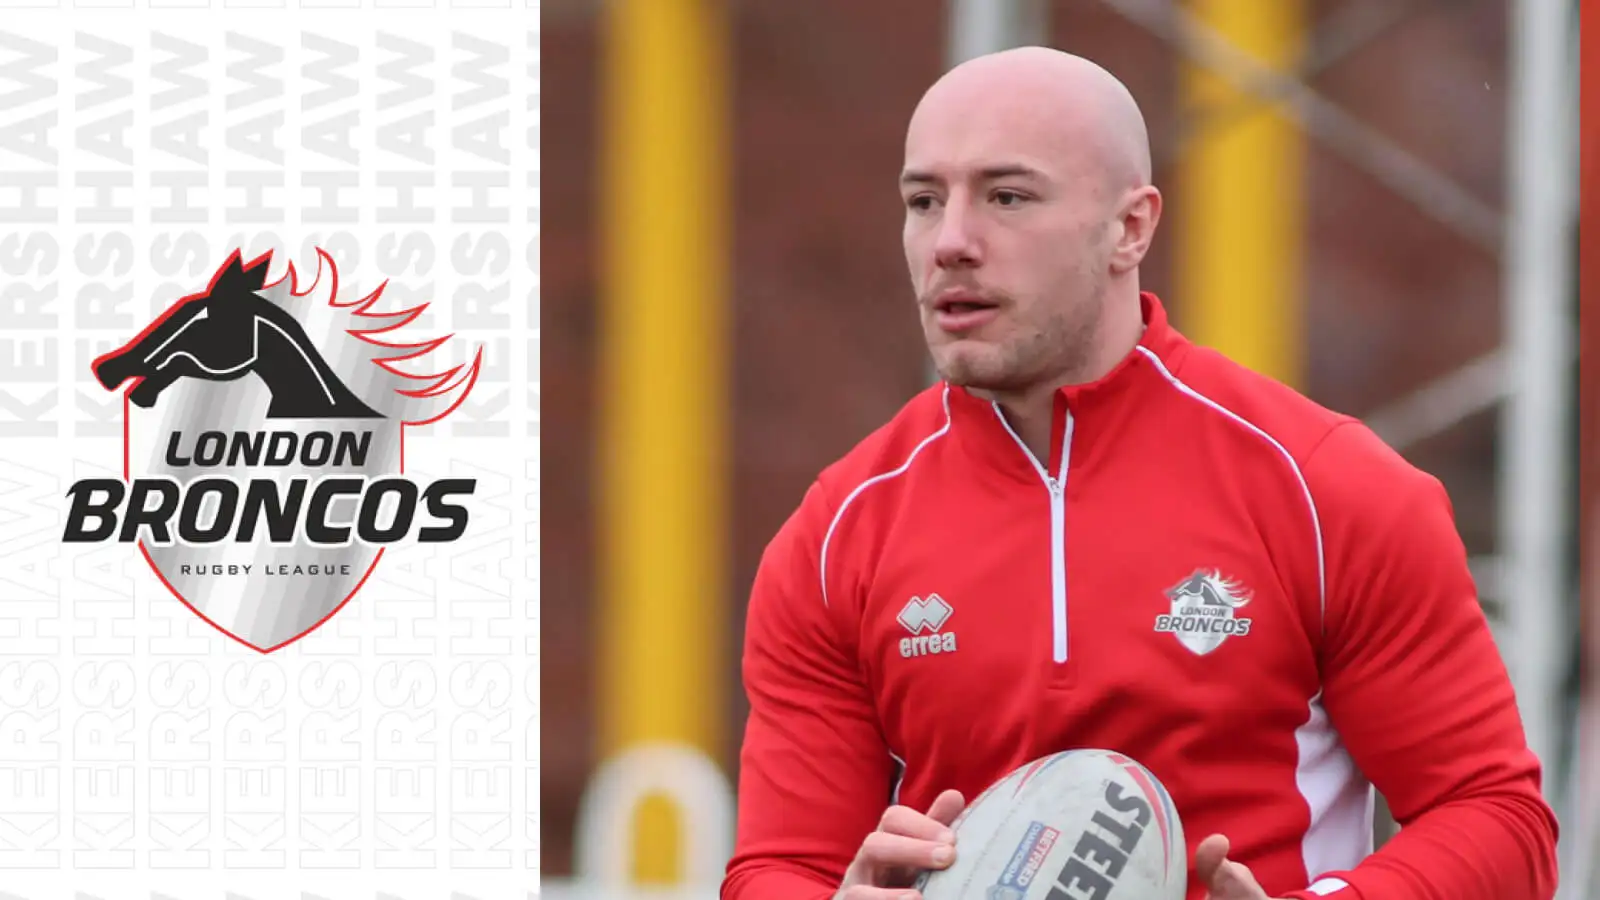 Exclusive: London Broncos offer Lee Kershaw contract after successful trial